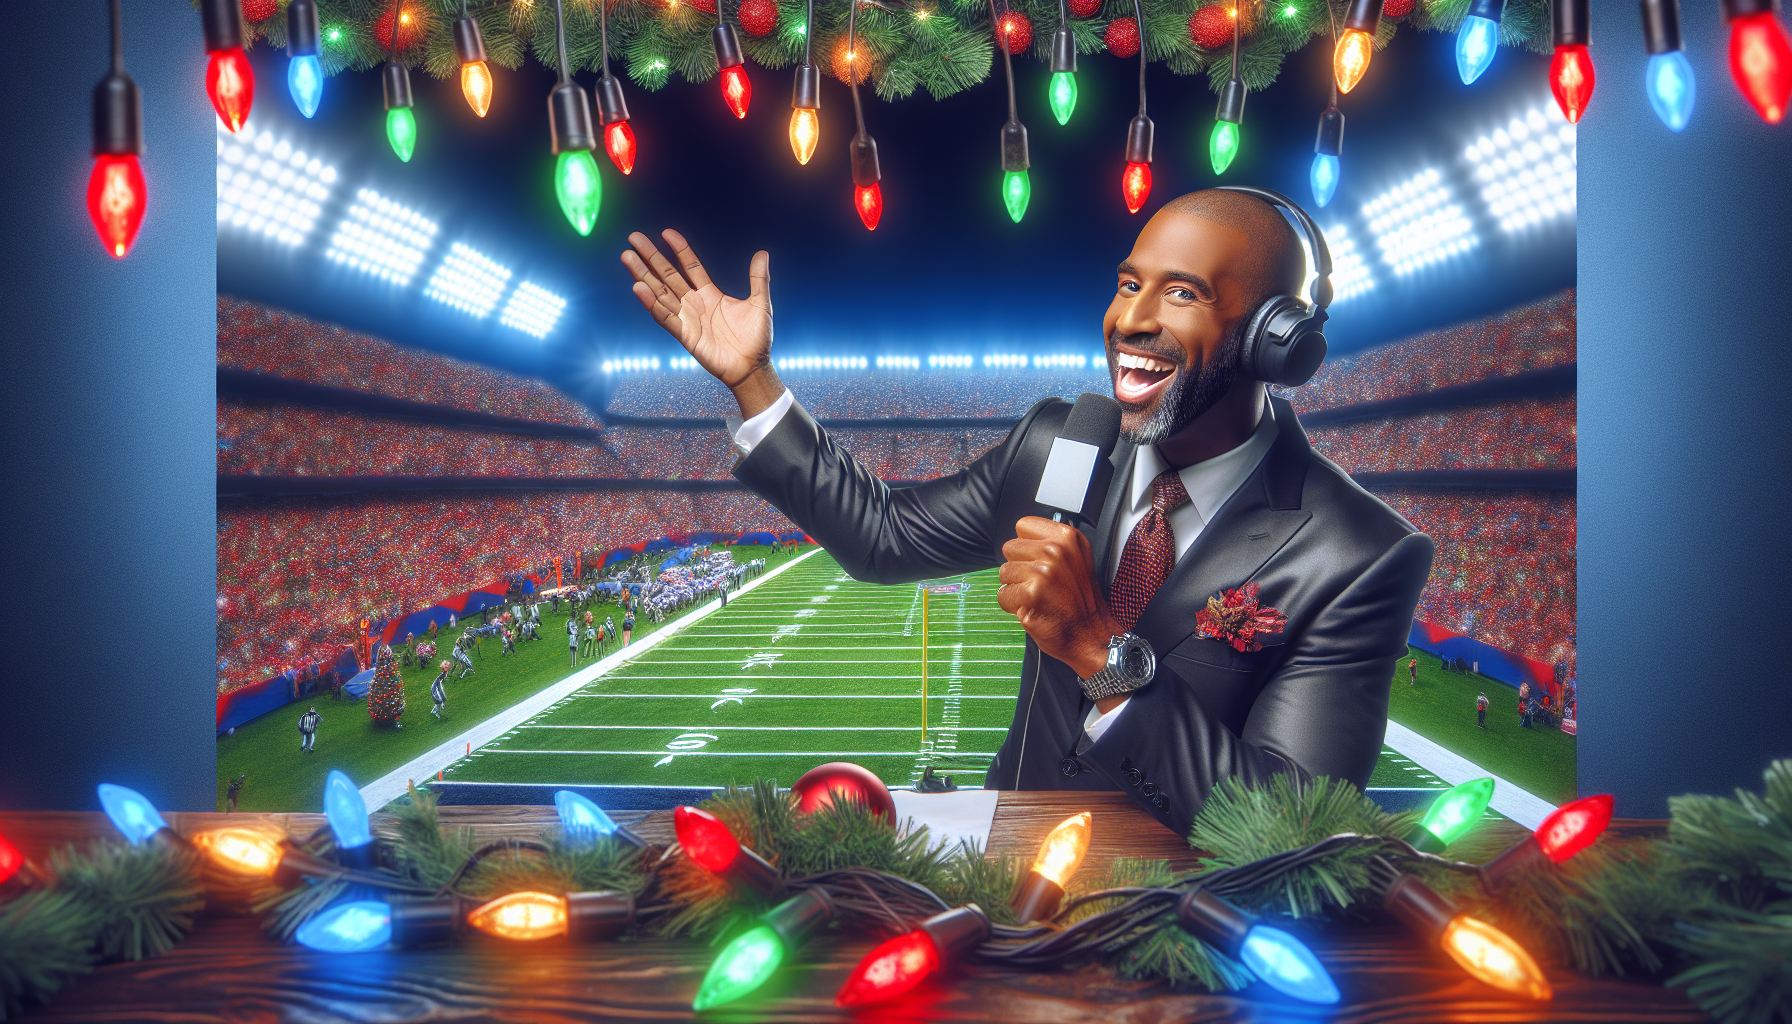 discover who will be the ultimate commentator for netflix's christmas nfl games and get ready for an exciting viewing experience!